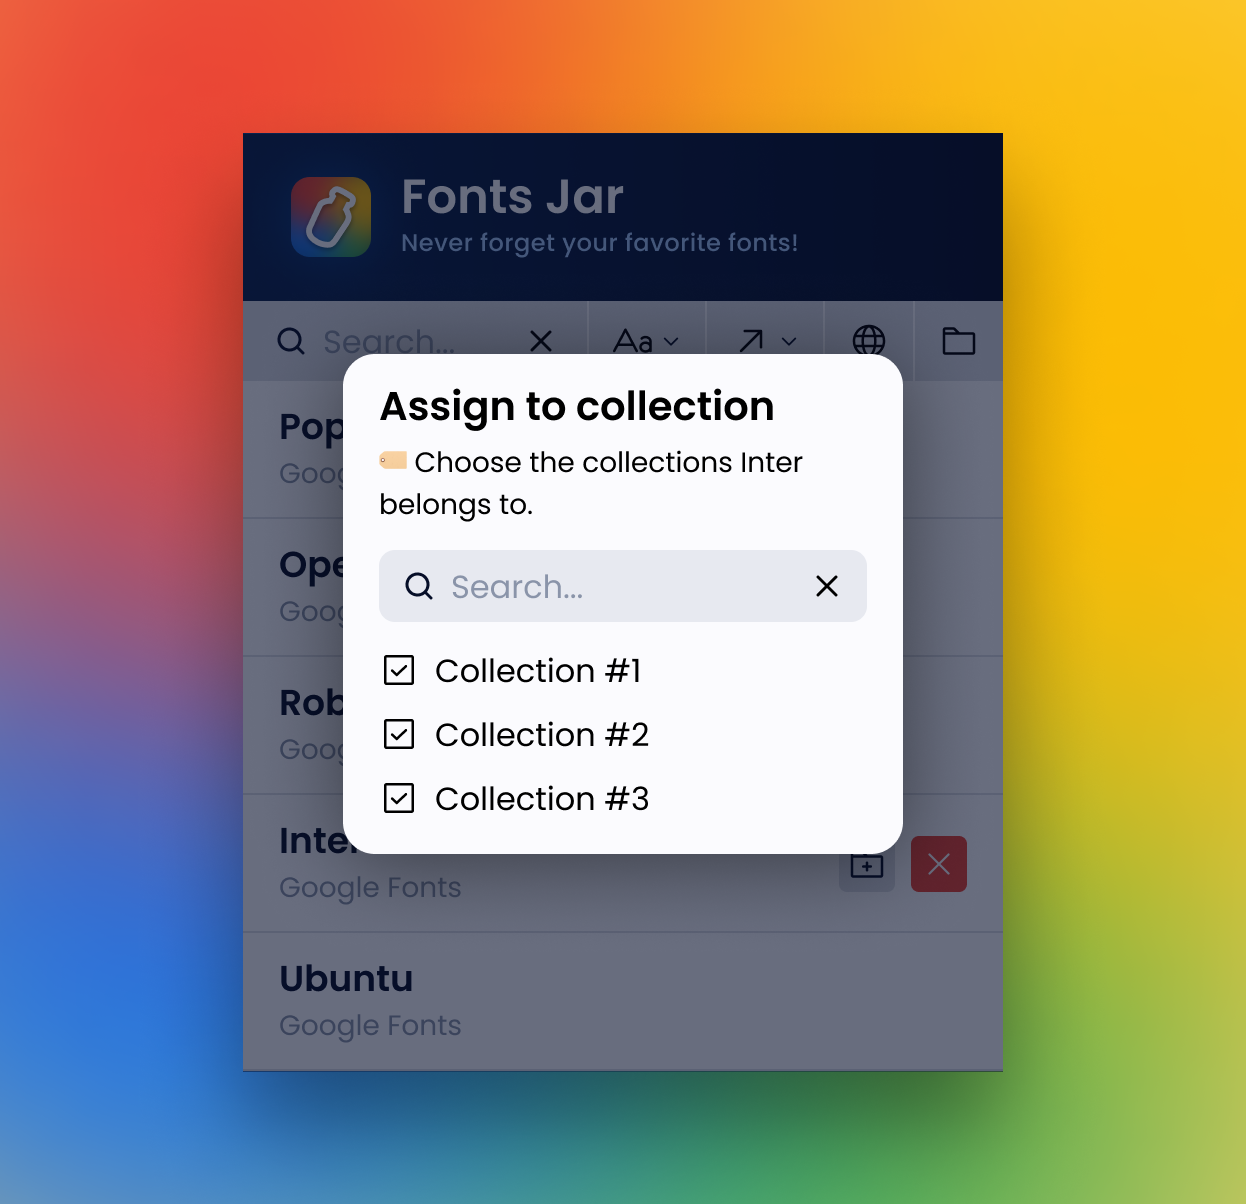 Fonts Jar's popup, with the assign to collection modal open